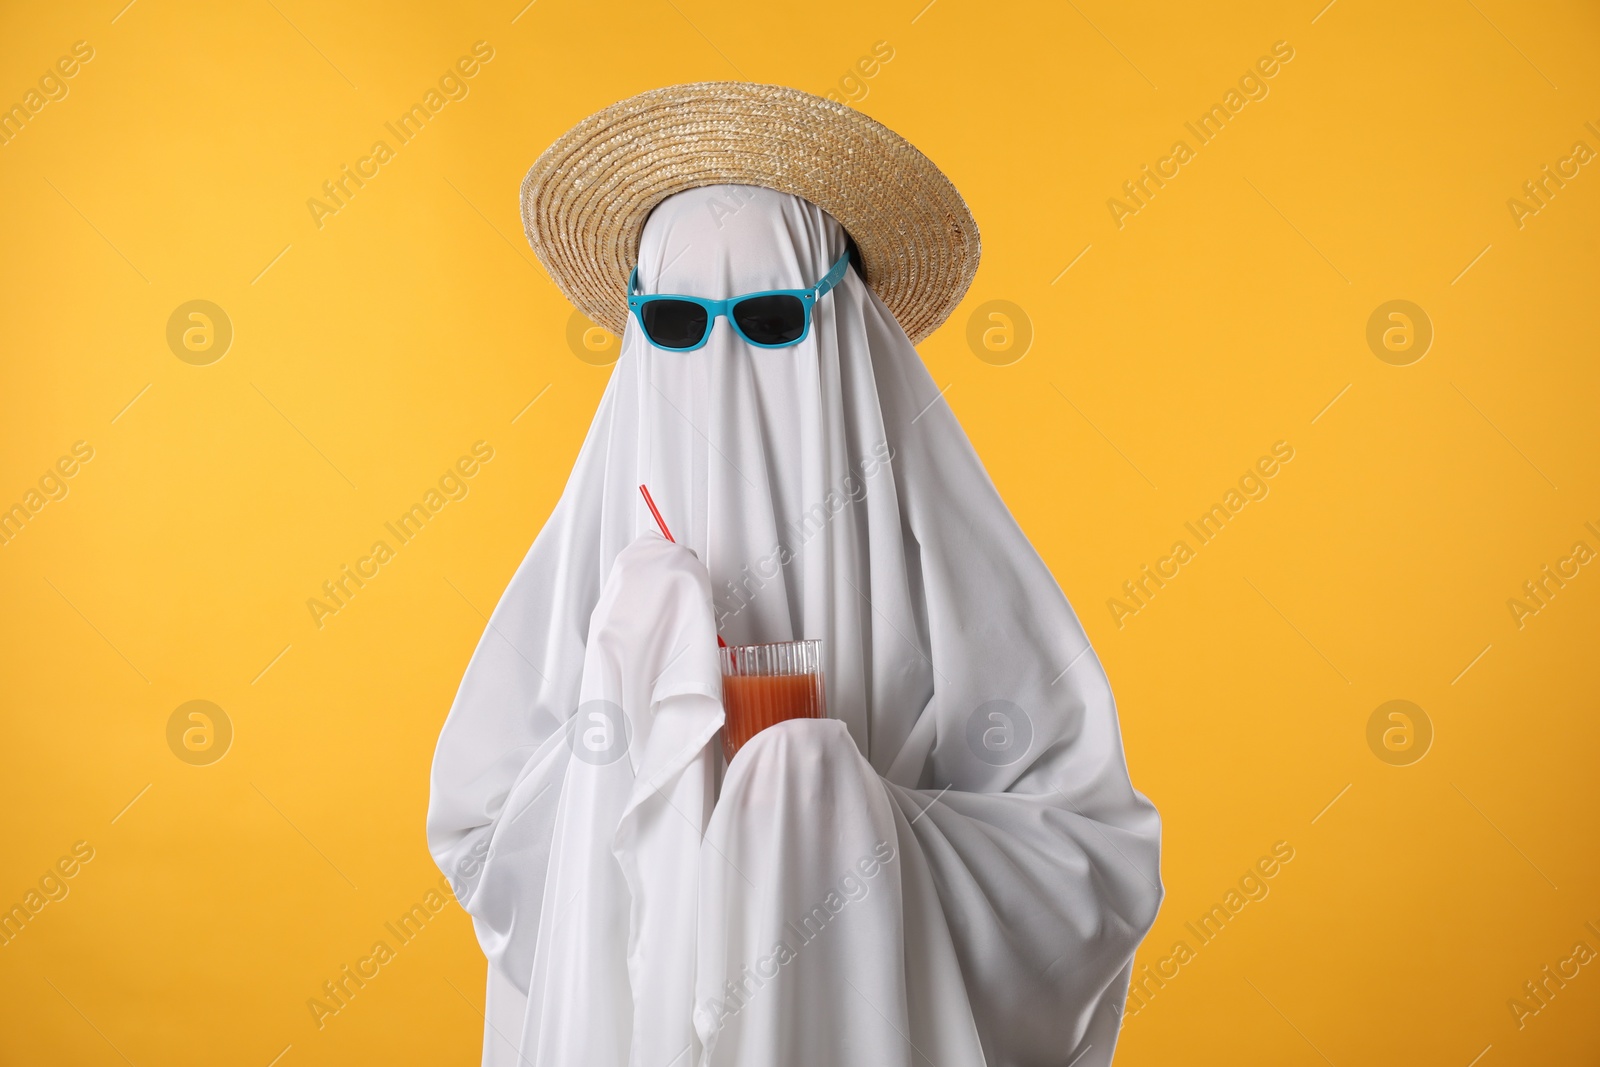 Photo of Person in ghost costume, sunglasses and straw hat holding glass of drink on yellow background